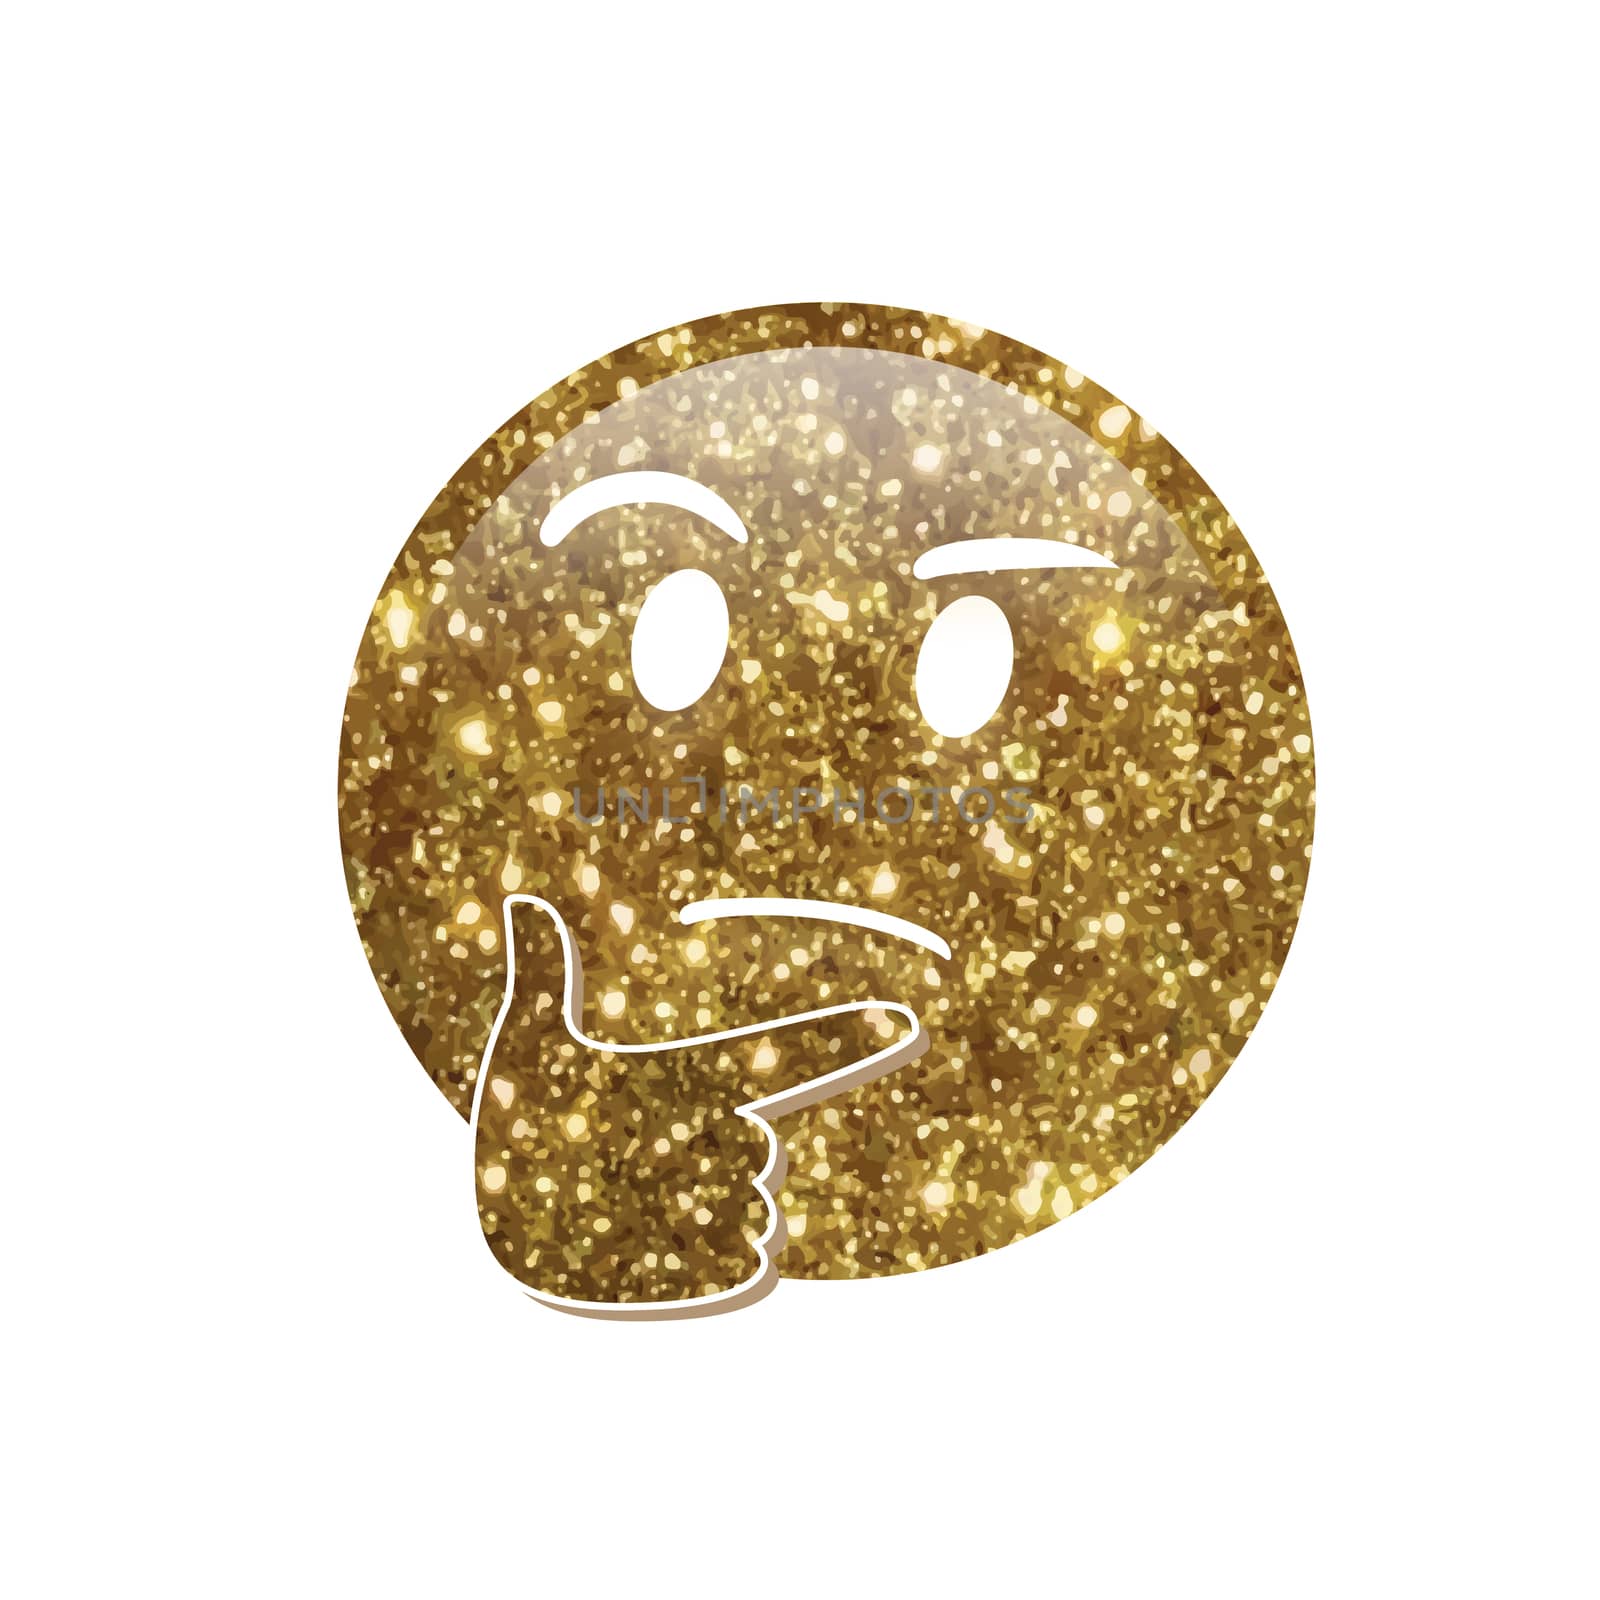 The emoji golden glitter pondering face with right hand icon